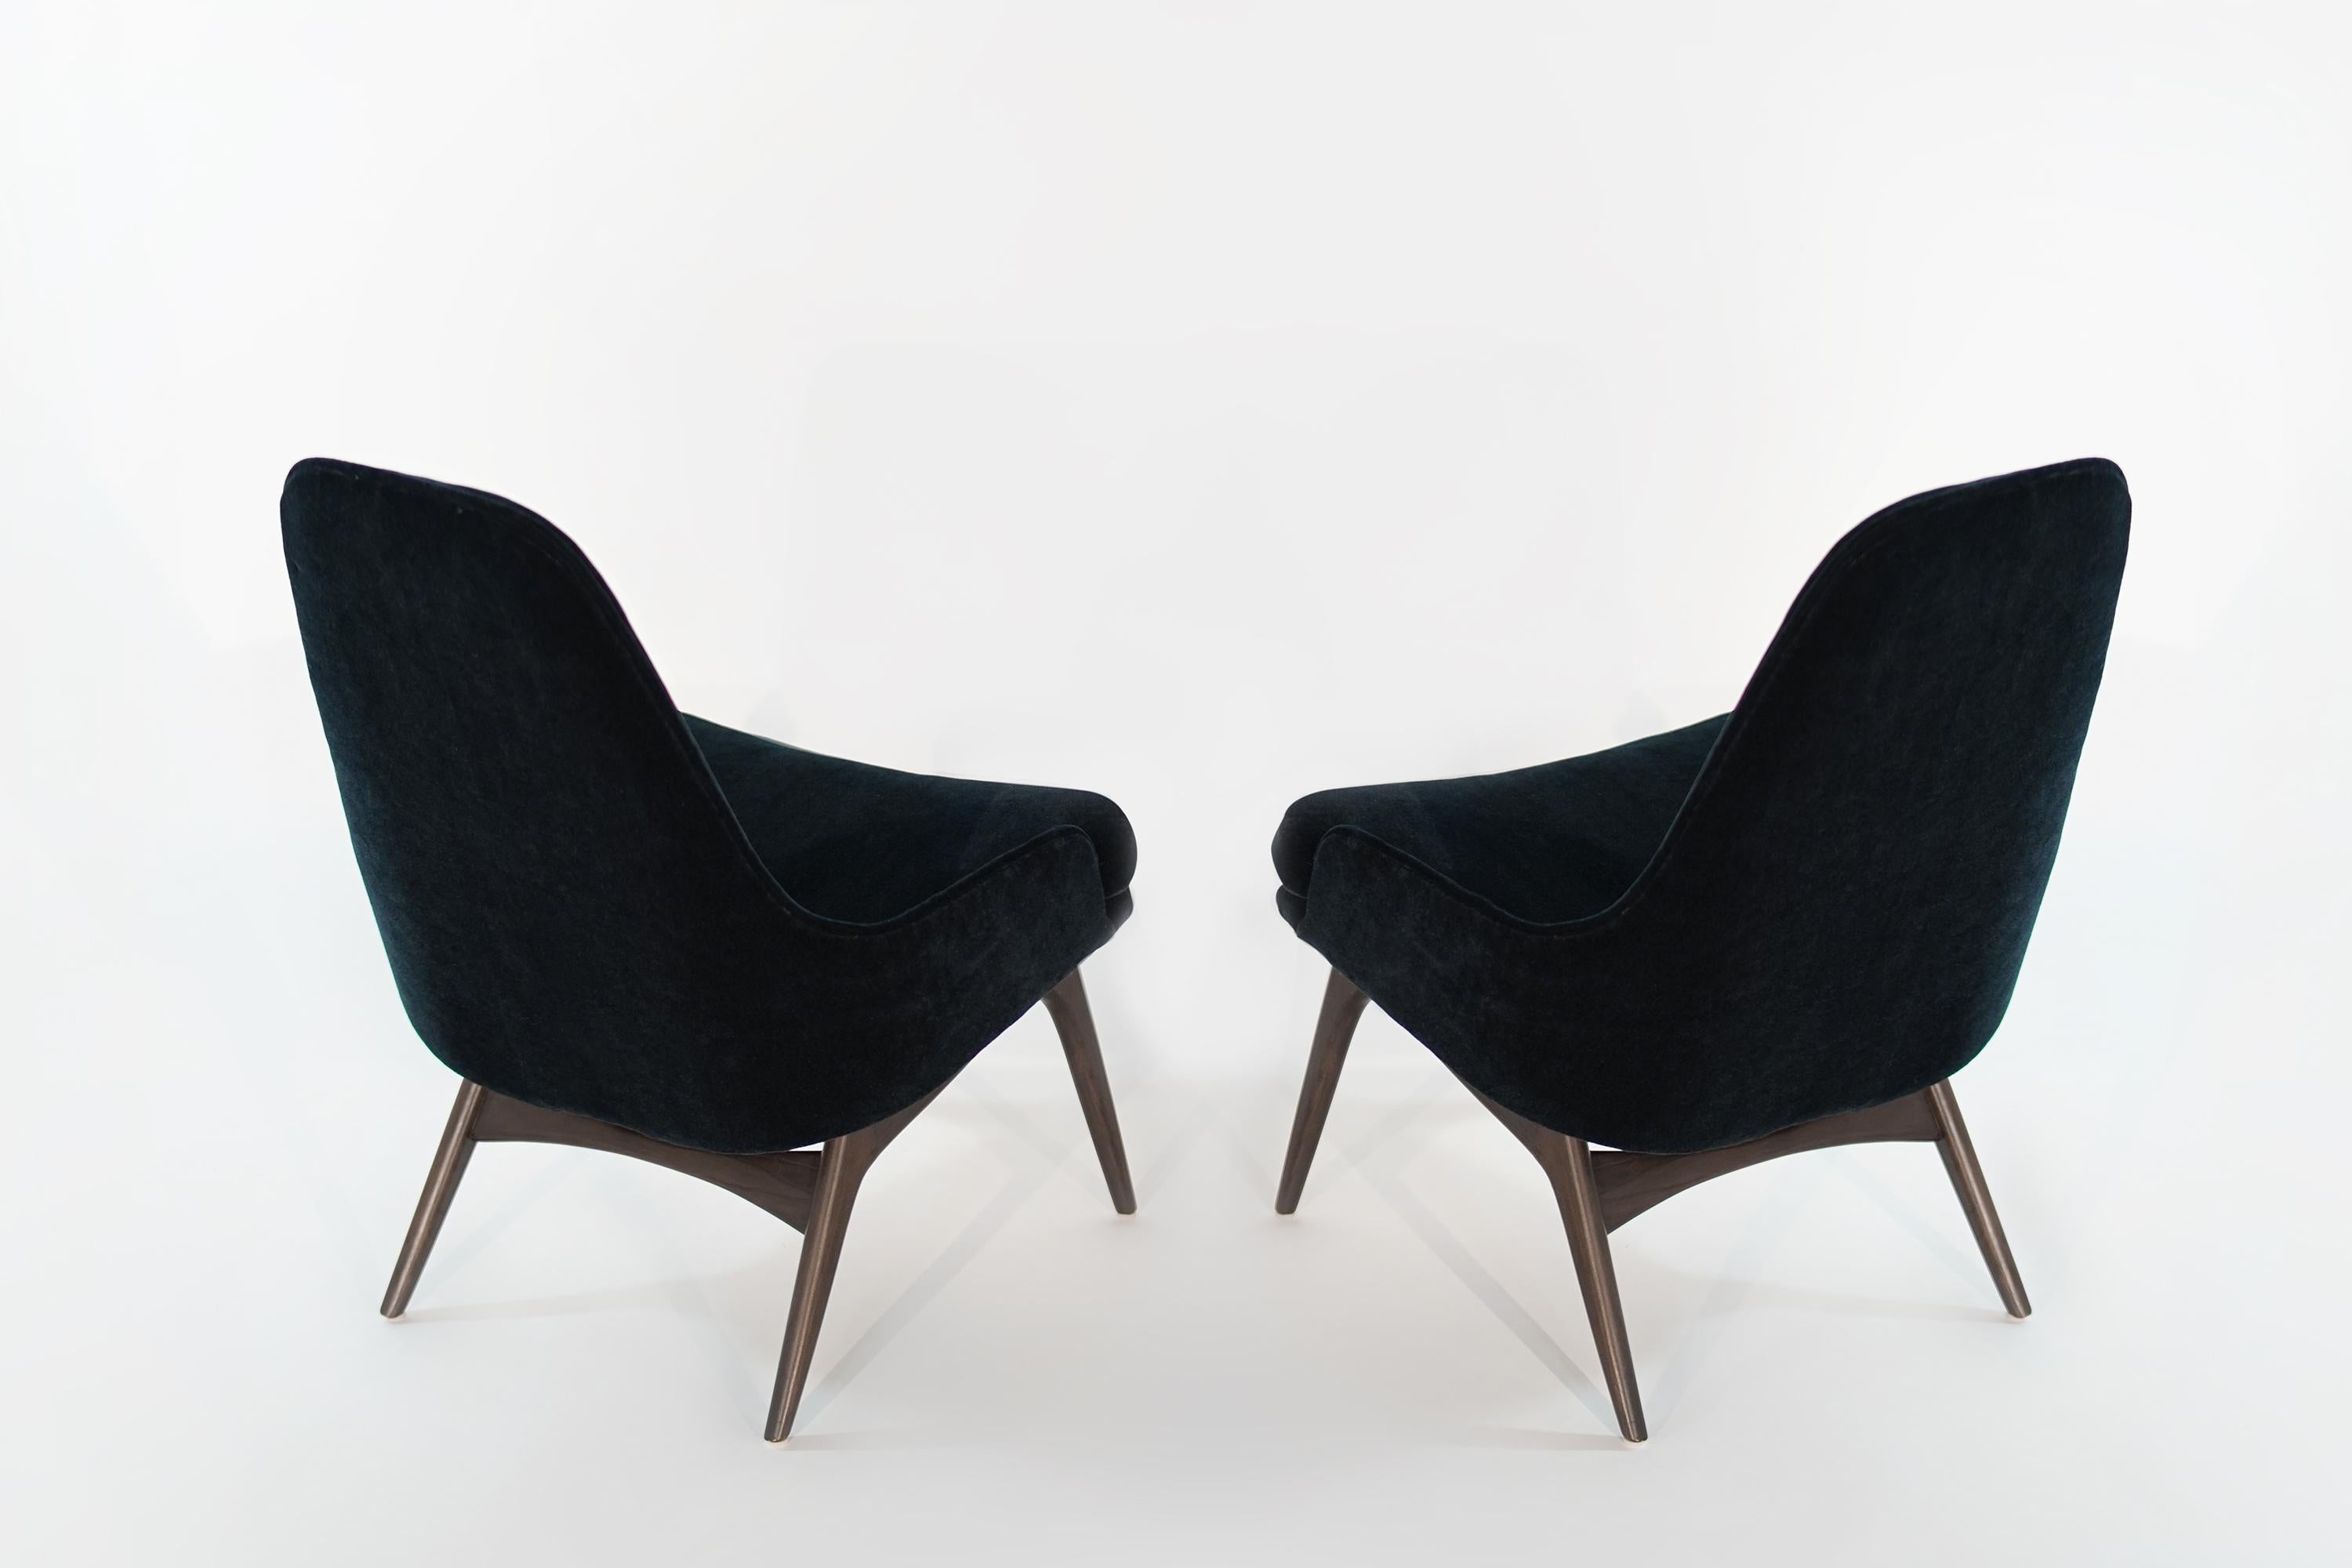 American Set of Slipper Chairs by Adrian Pearsall in Navy Mohair, 1950s For Sale